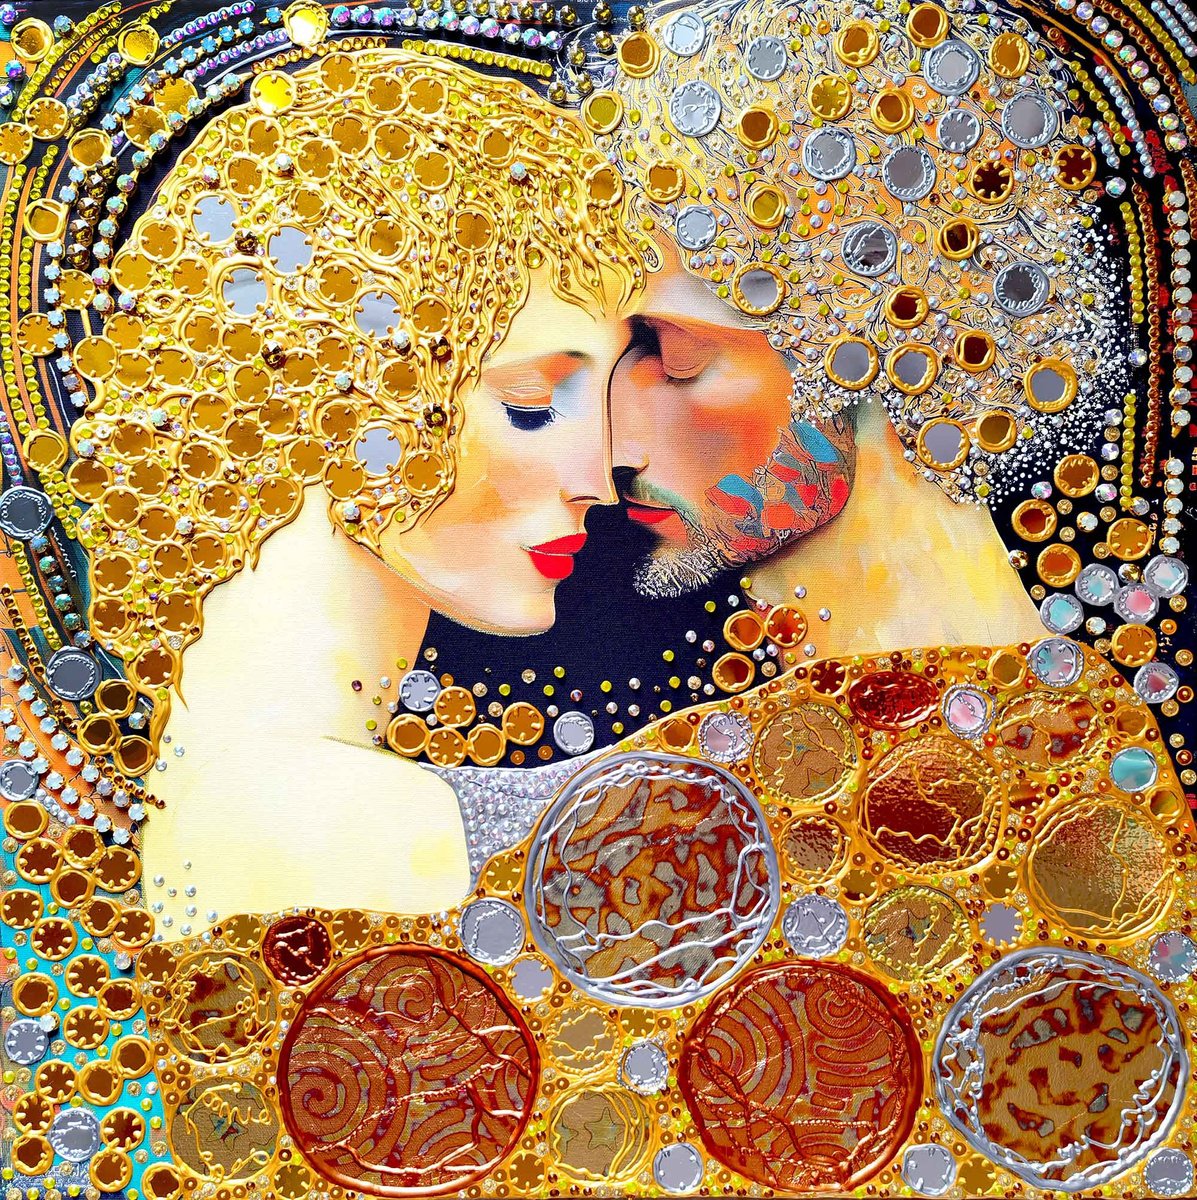 Love original painting. Golden decorative artwork with gold leaf. Gift for woman \ wife by BAST